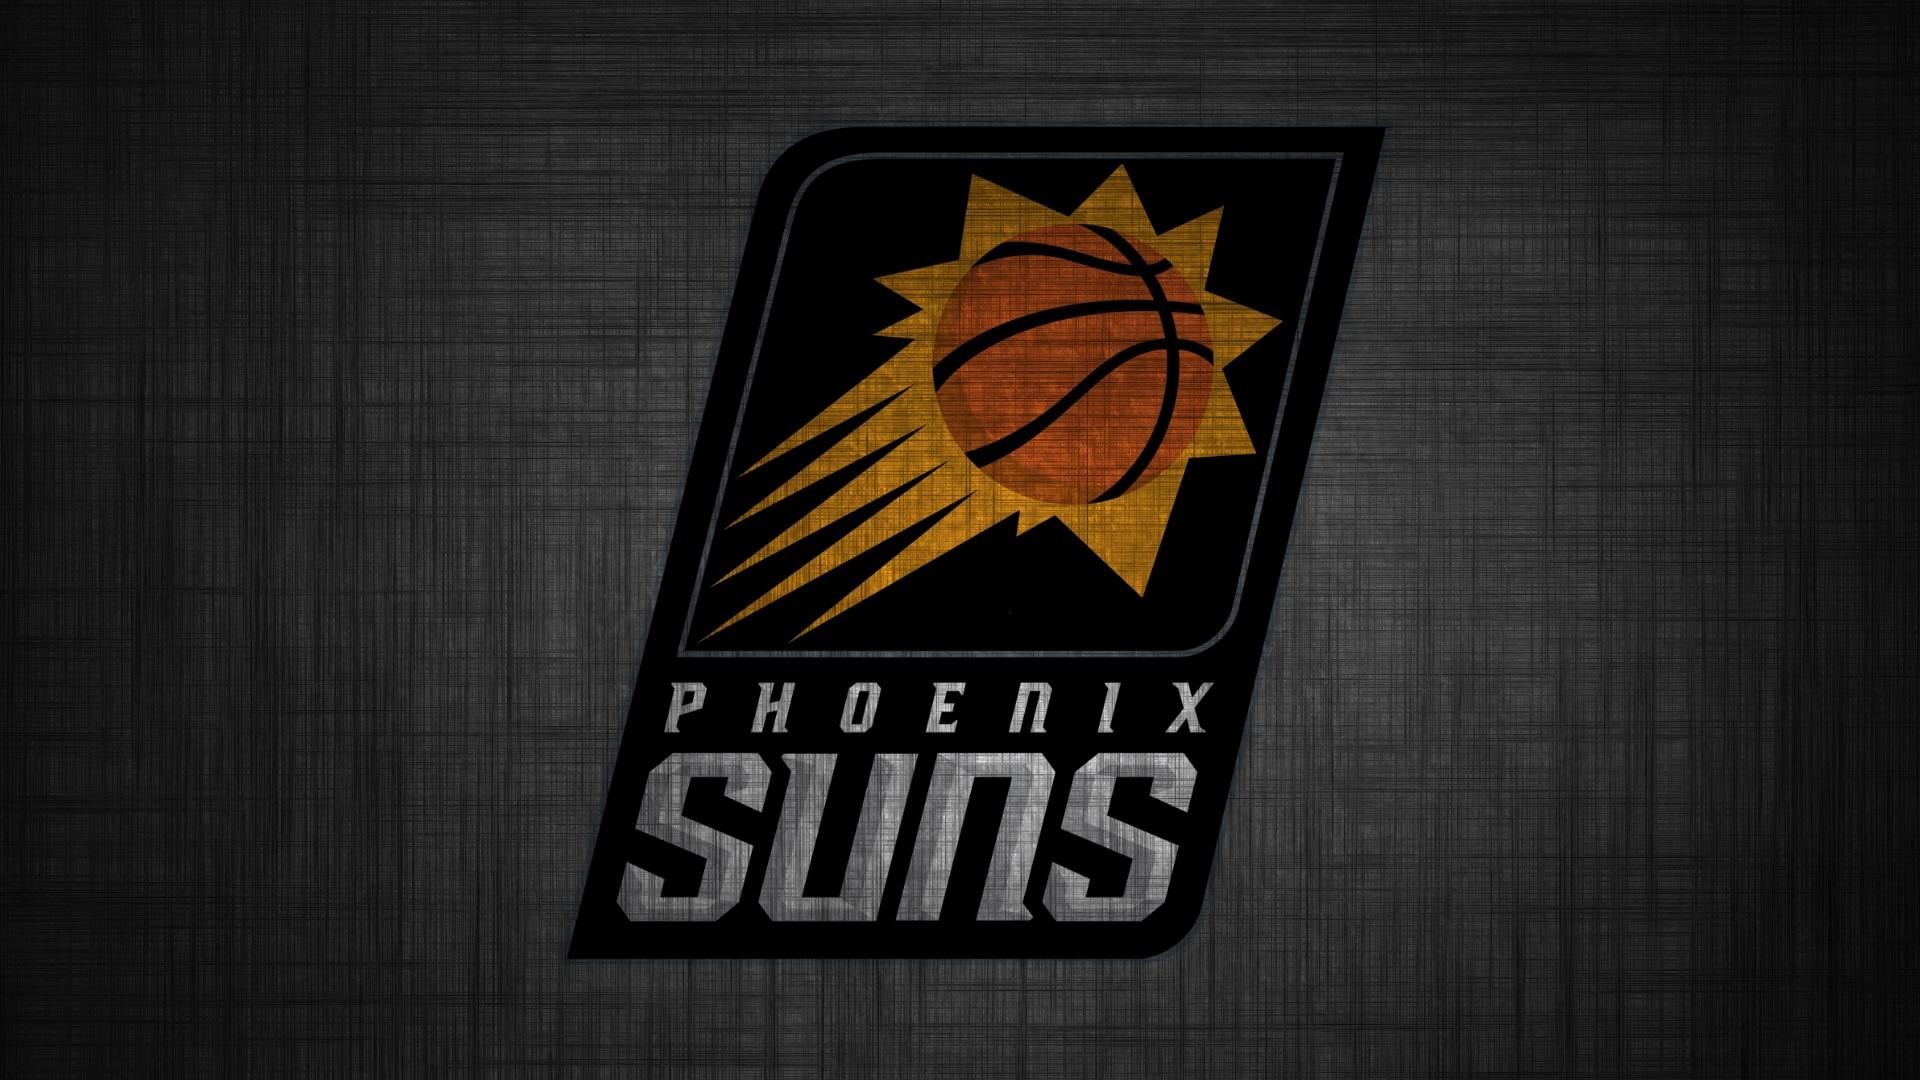 Wallpaper Desktop Phoenix Suns HD with high-resolution 1920x1080 pixel. You can use this wallpaper for your Desktop Computer Backgrounds, Windows or Mac Screensavers, iPhone Lock screen, Tablet or Android and another Mobile Phone device